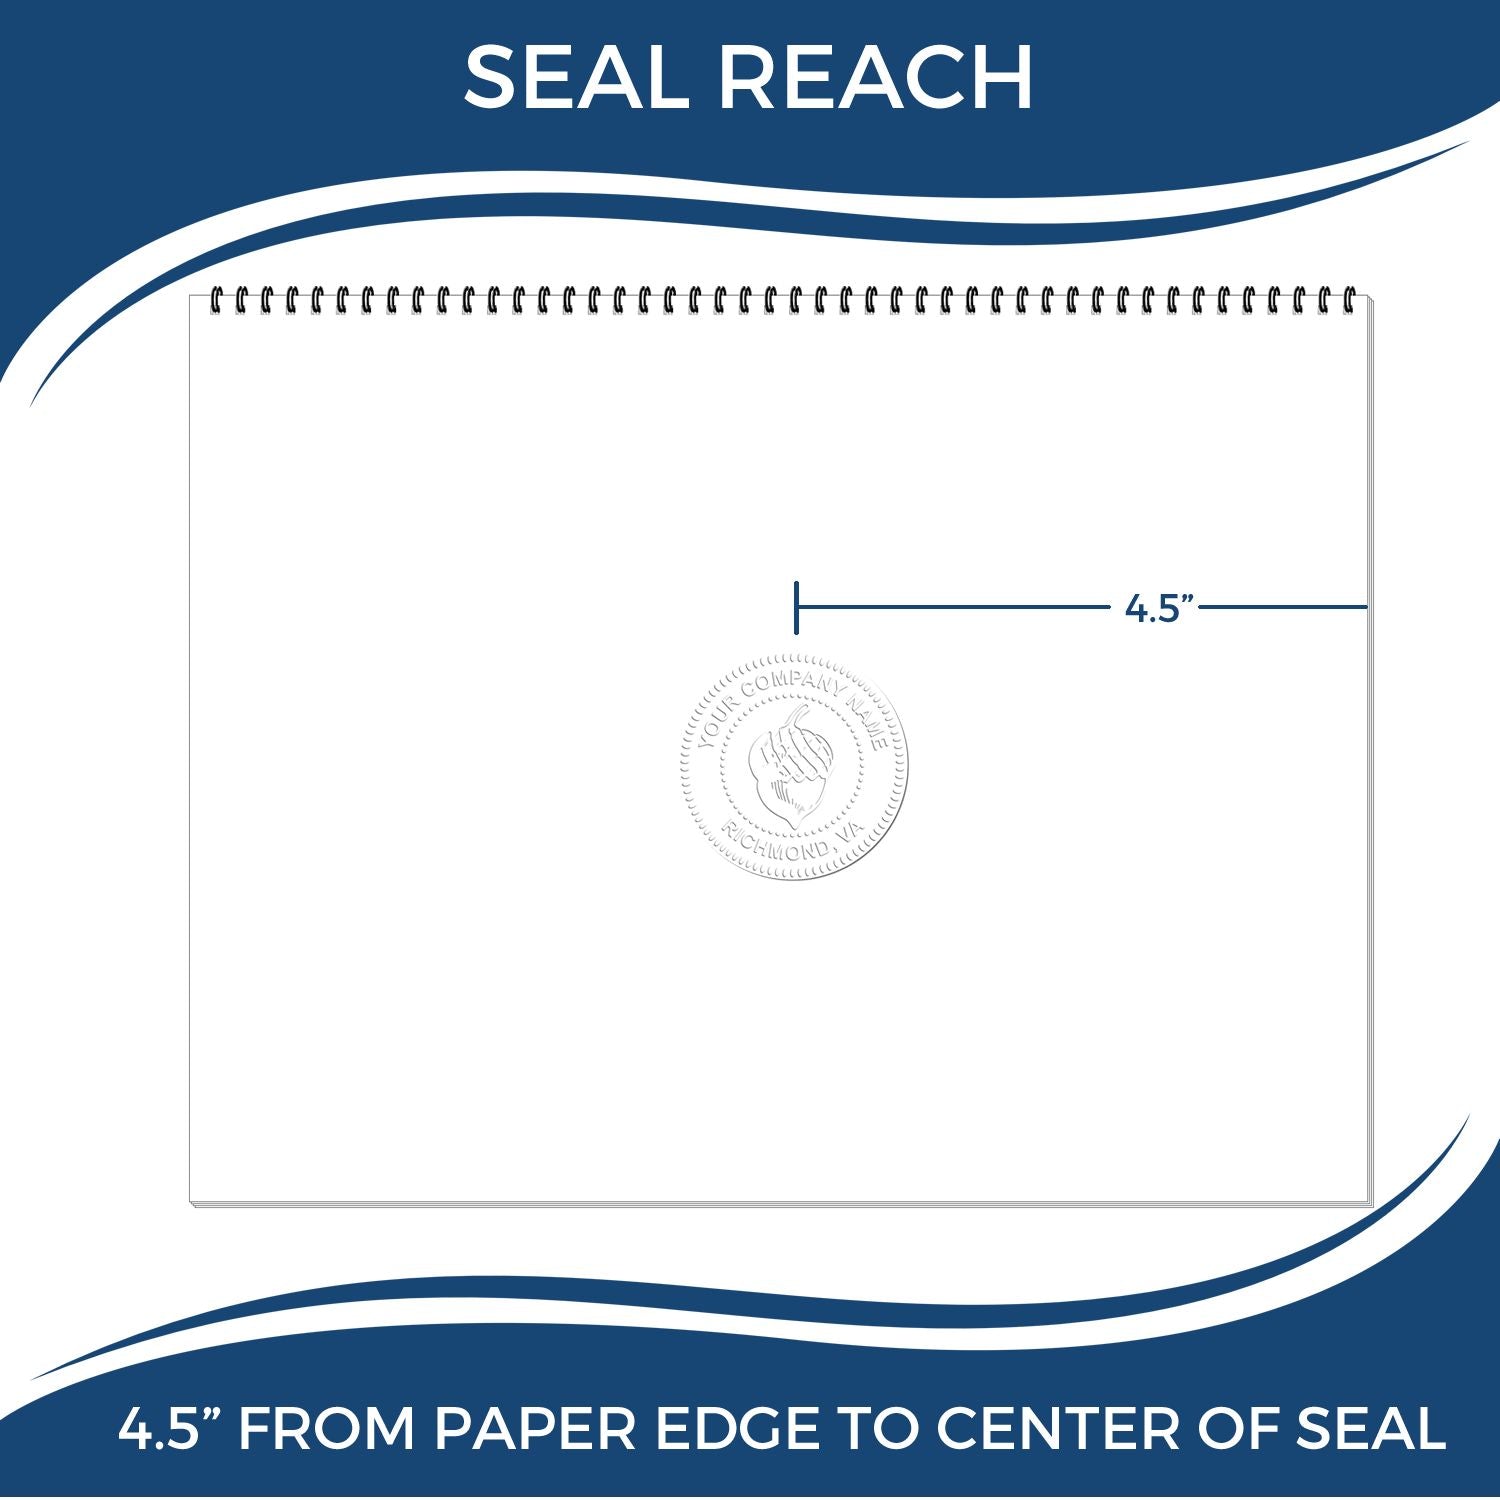 An infographic showing the seal reach which is represented by a ruler and a miniature seal image of the State of District of Columbia Extended Long Reach Engineer Seal